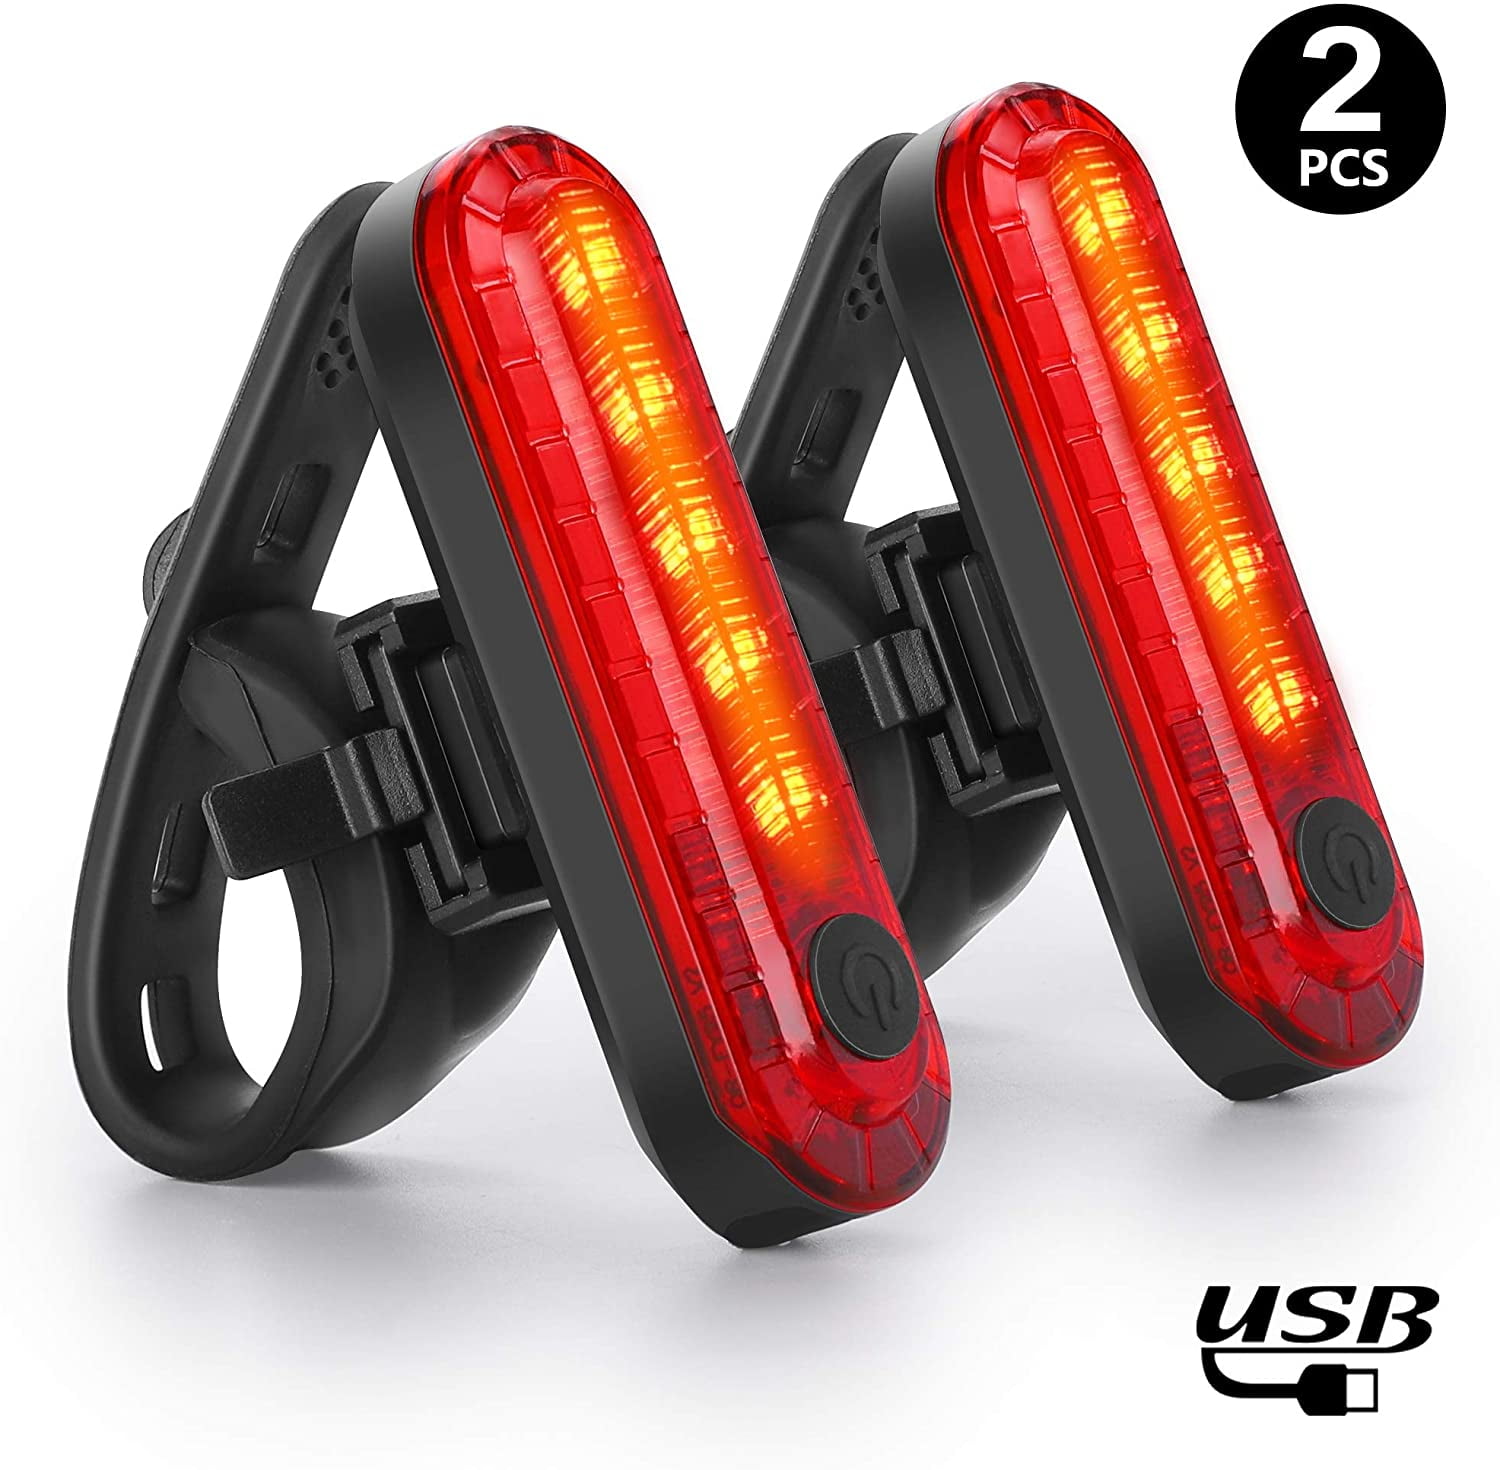 Tail Light for Bicycle USB Rechargeable - Powerful LED Bike Rear Light - Bright and Easy to Install Red Lights Security Cycling,2 Pack - Walmart.com